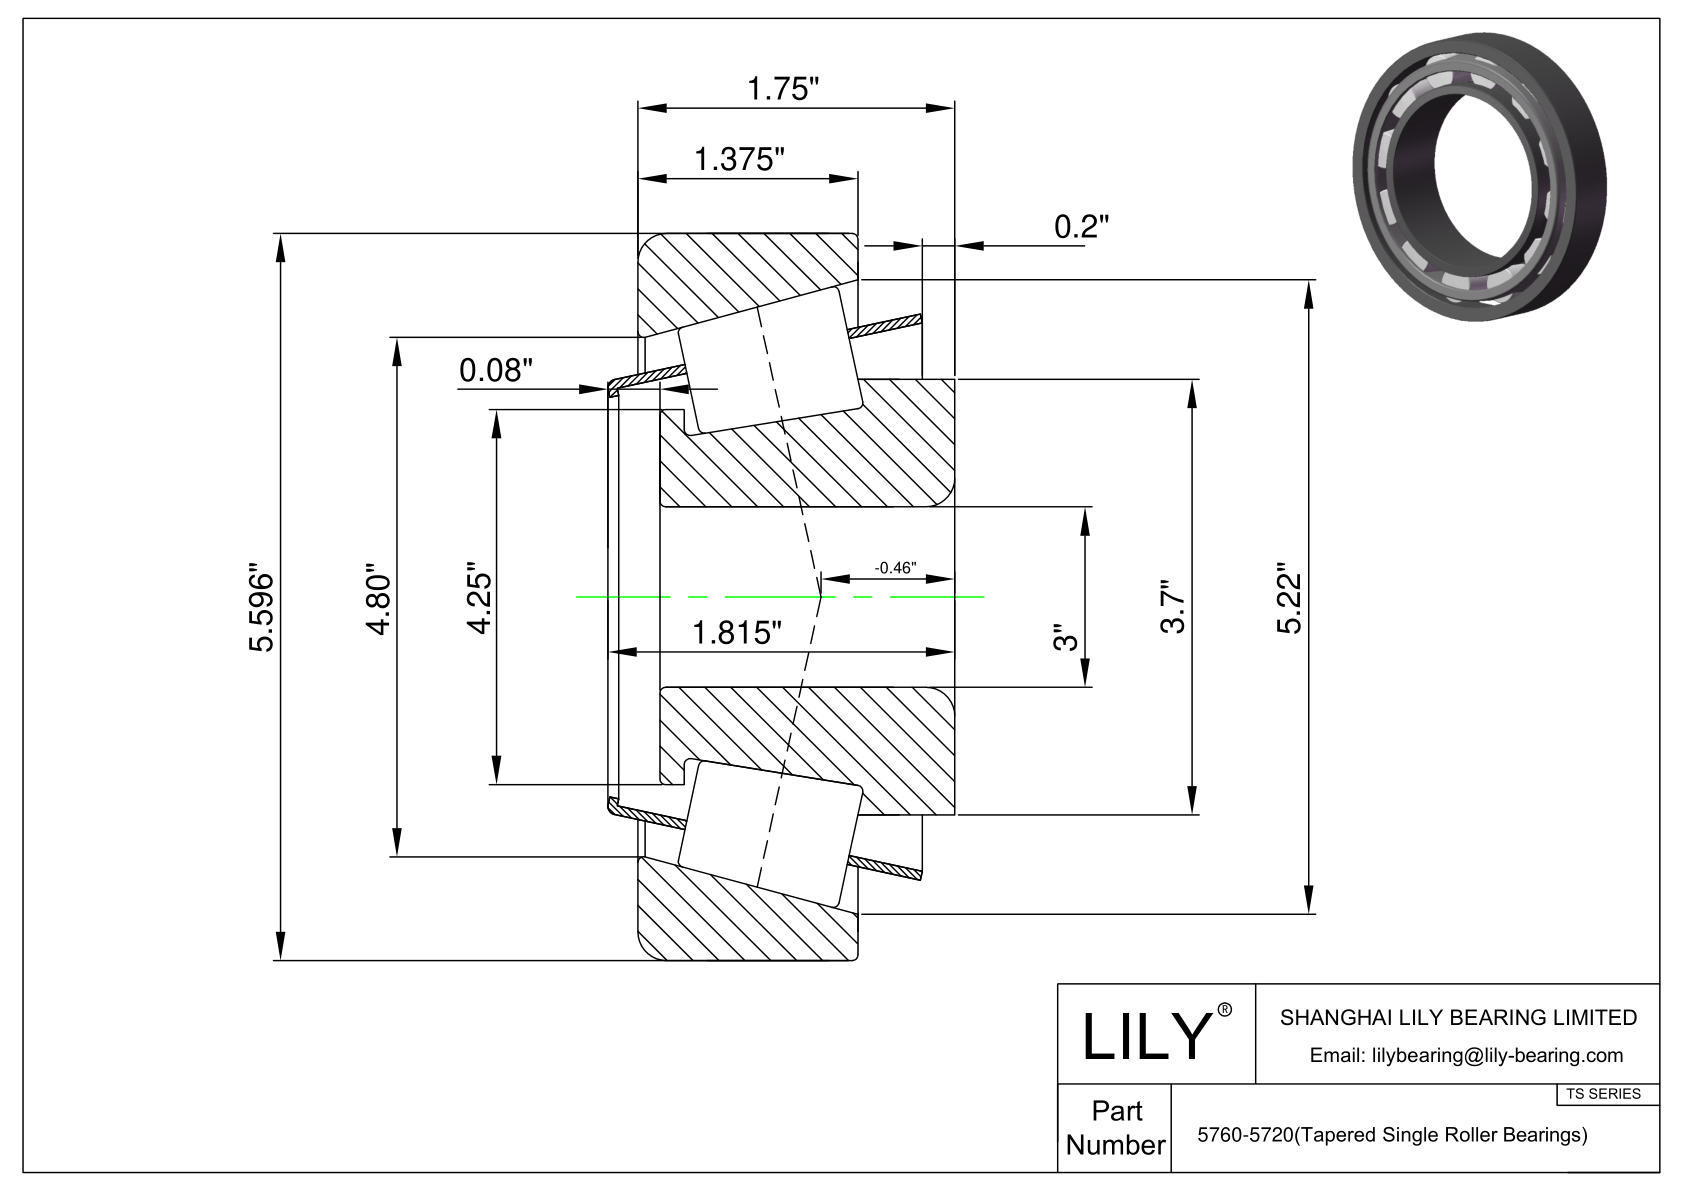 5760-5720 TS (Tapered Single Roller Bearings) (Imperial) cad drawing